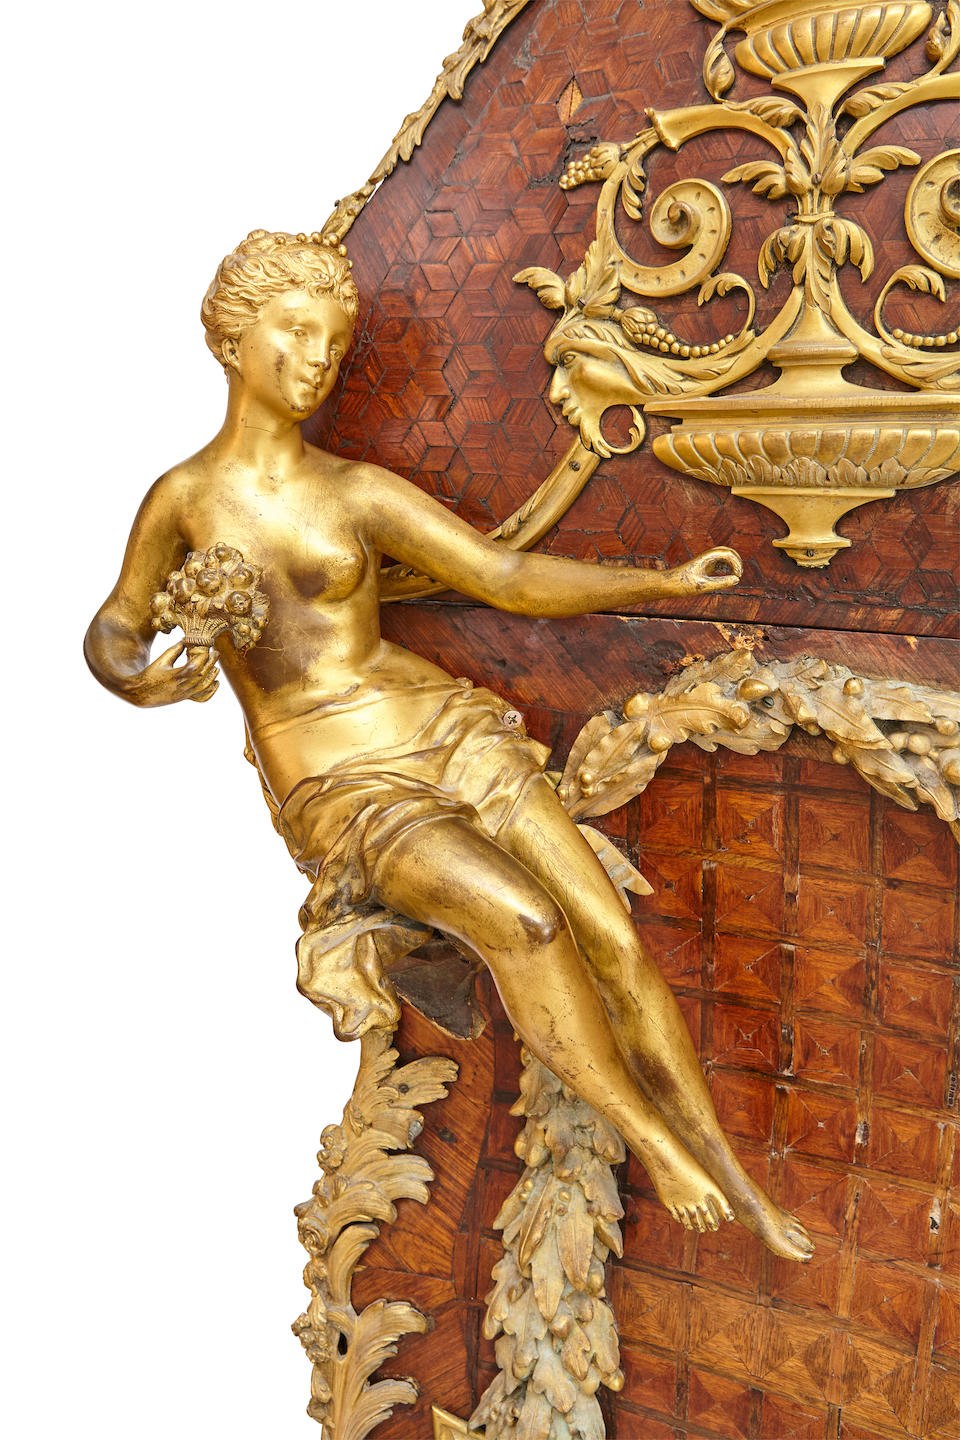 An Impressive Louis XV style gilt bronze mounted parquetry inlaid double-sided bomb&#233; cylinder bureauAttributed to Joseph-Emmanuel ZwienerLate 19th century